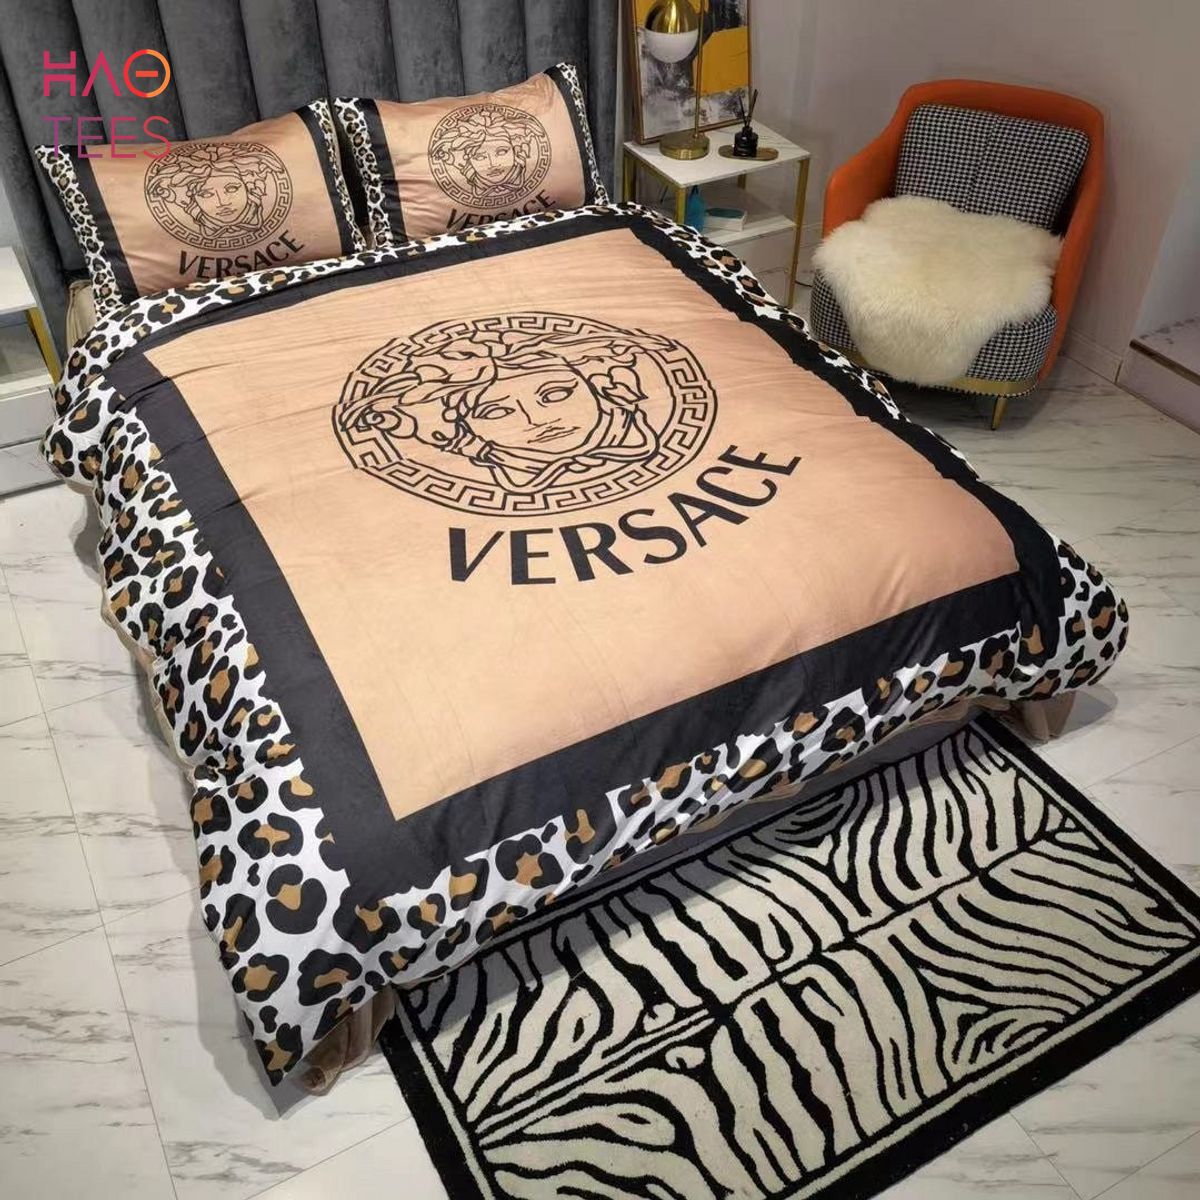 Versace Jaguar Luxury Brand Inspired 3D Personalized Customized Bedding Sets